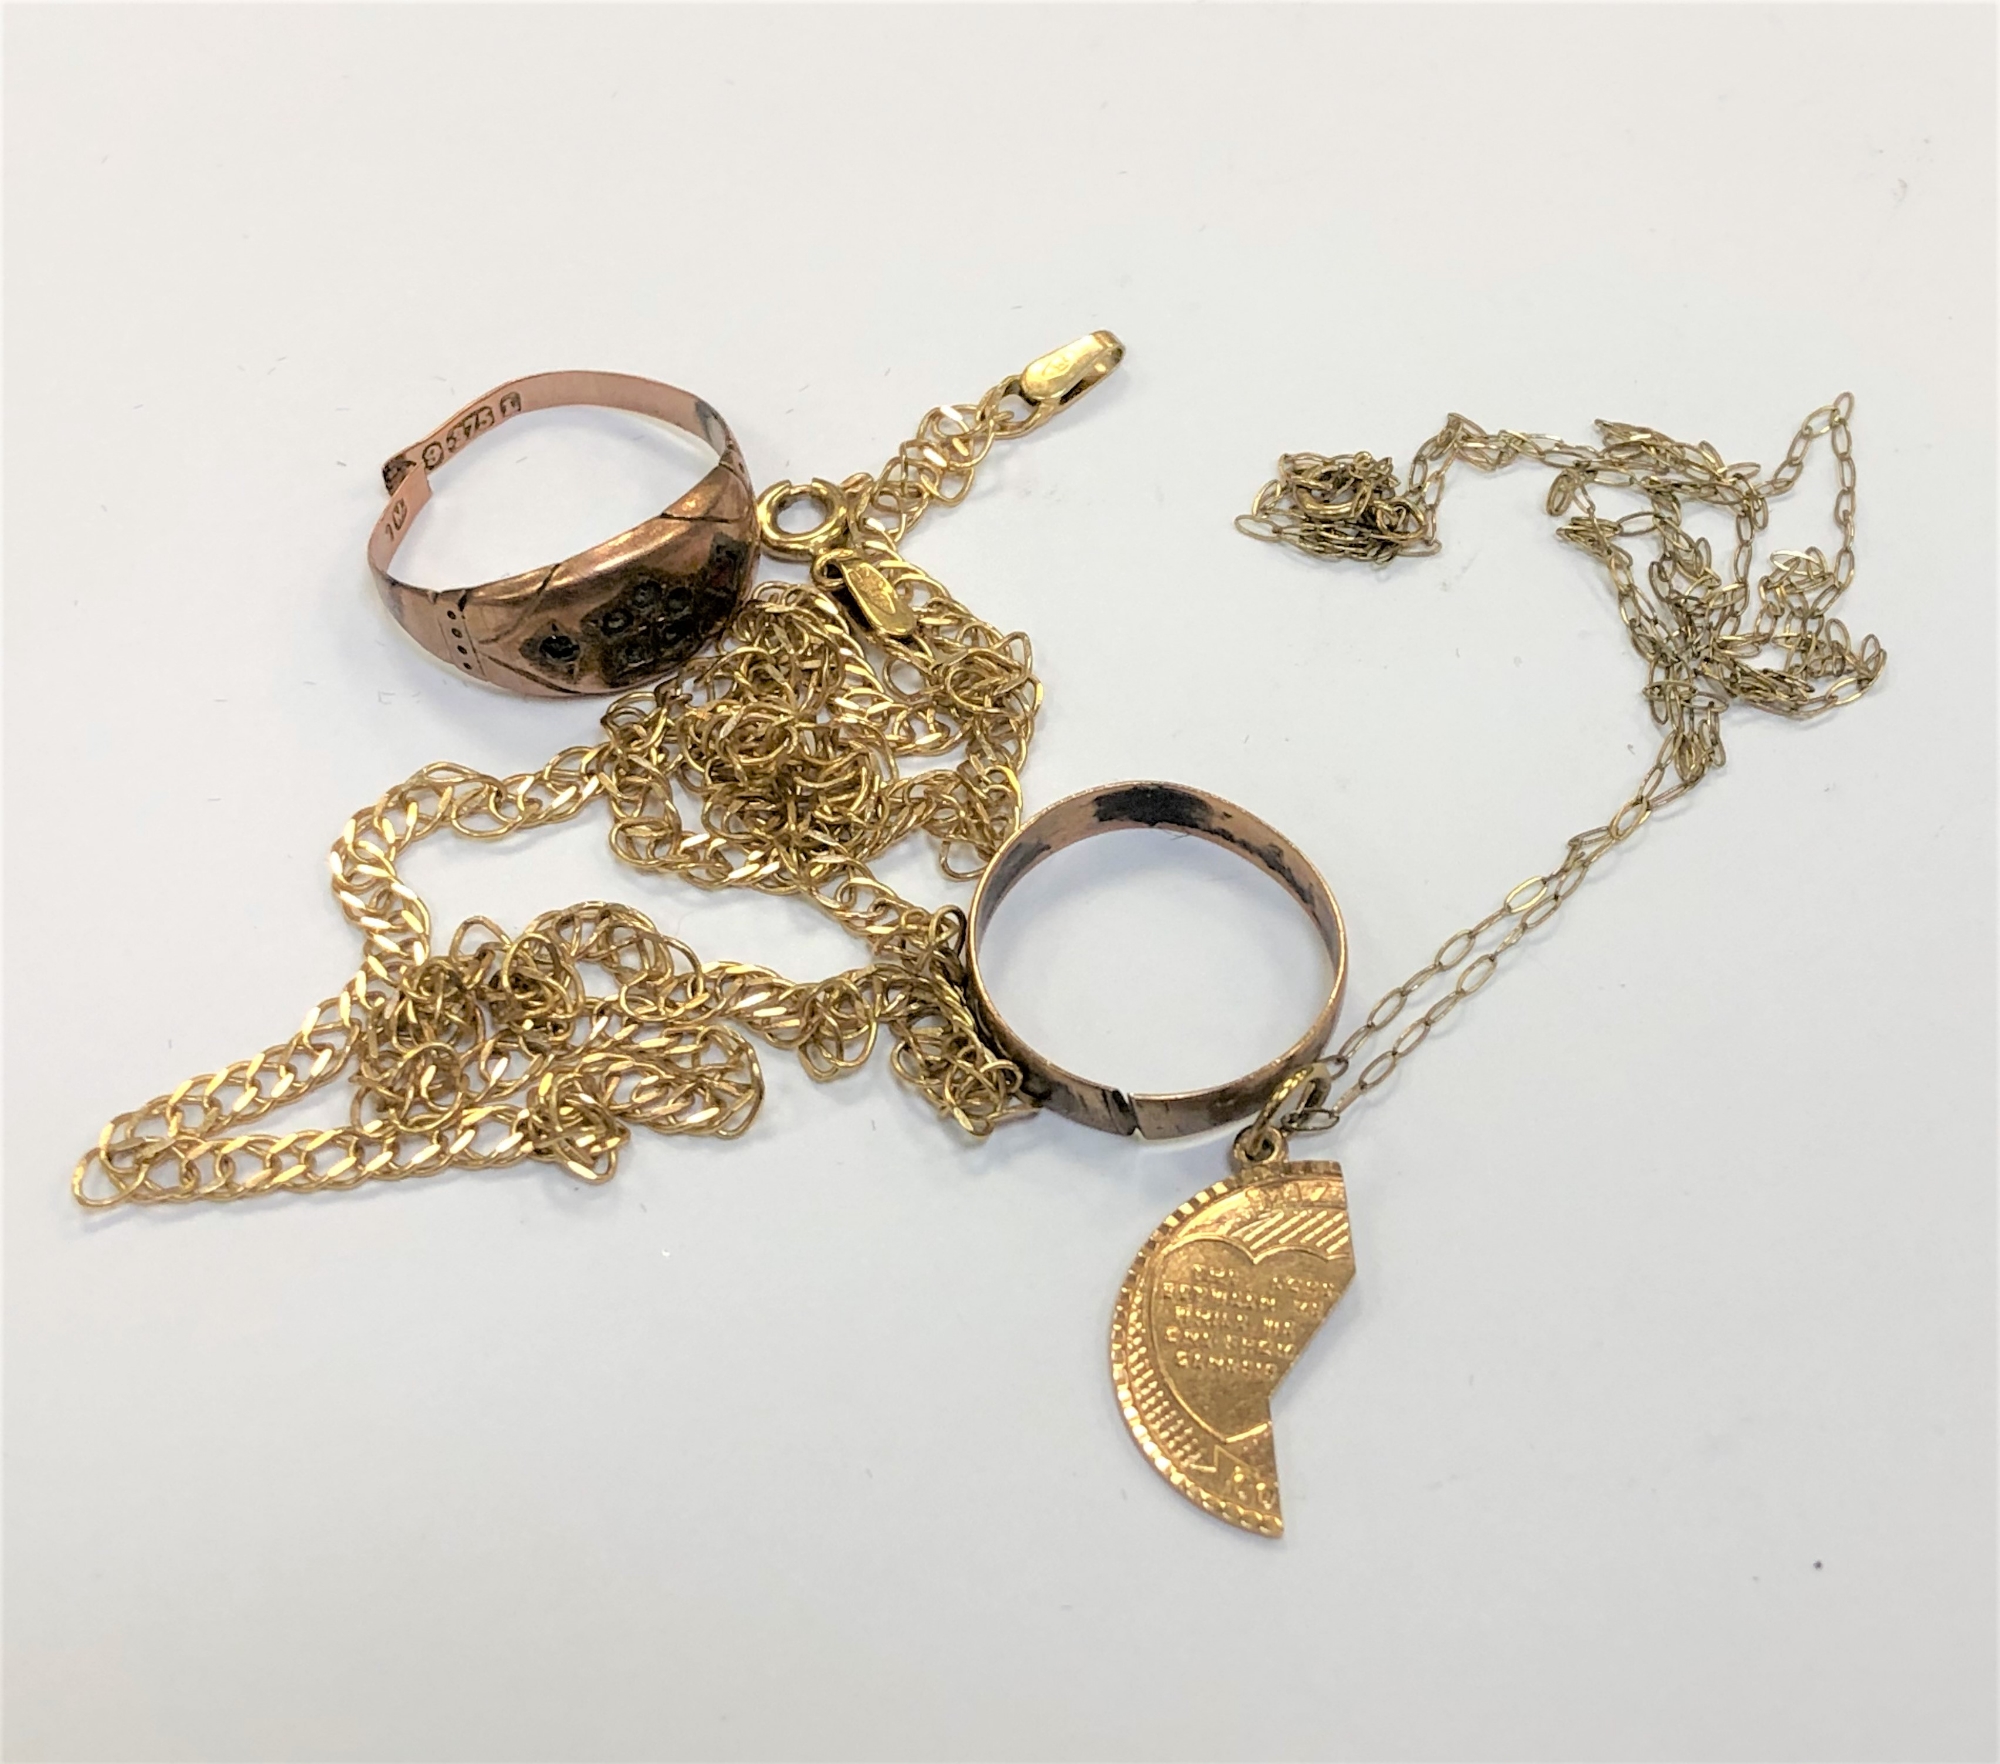 Two 9ct gold rings (broken), a 9ct gold chain and a 9ct gold pendant on chain.